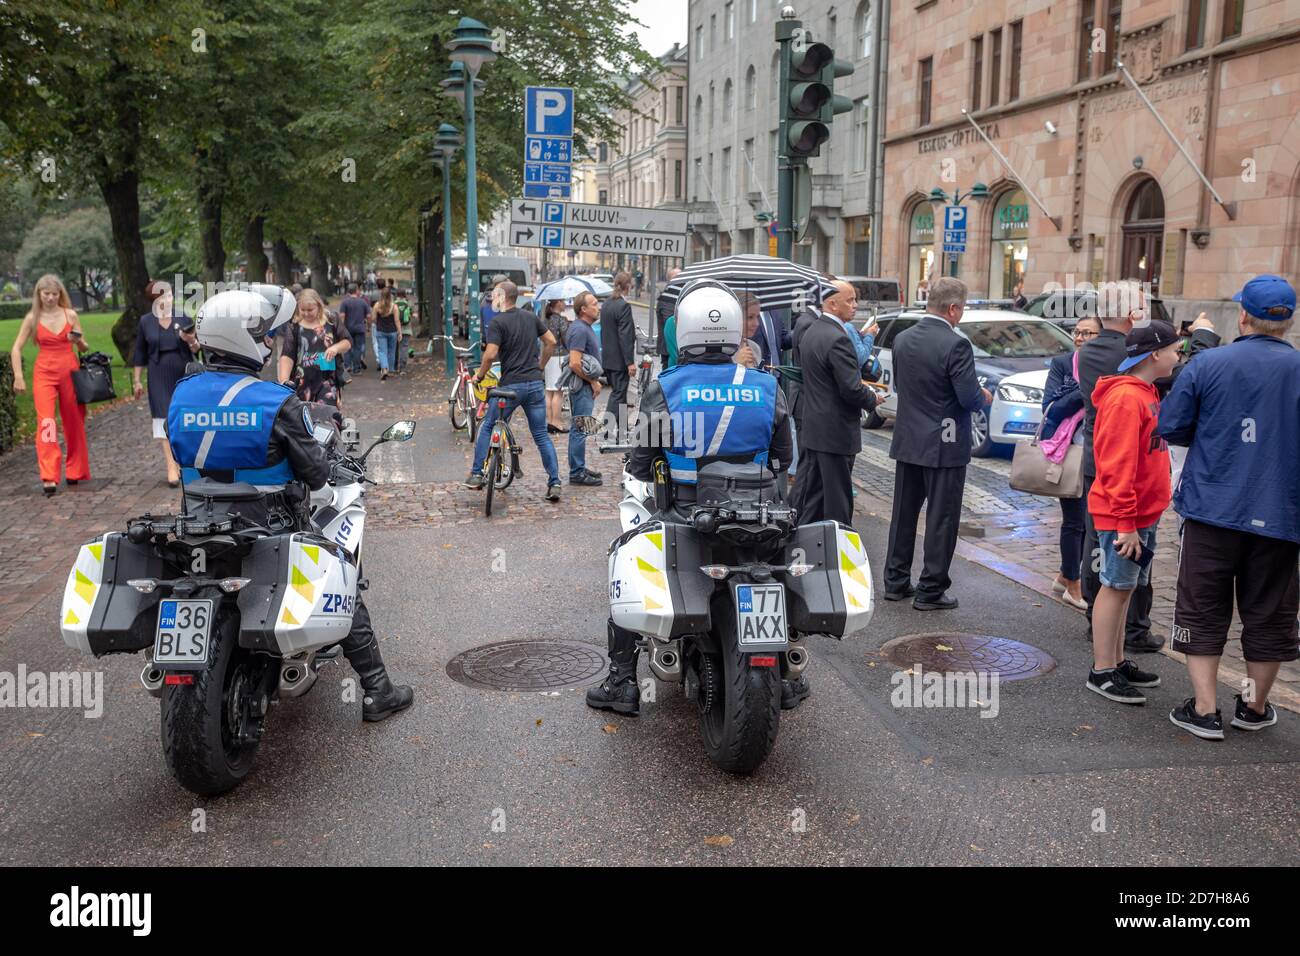 Two police officer from behind on police motorcycle in Helsinki, Finland Stock Photo